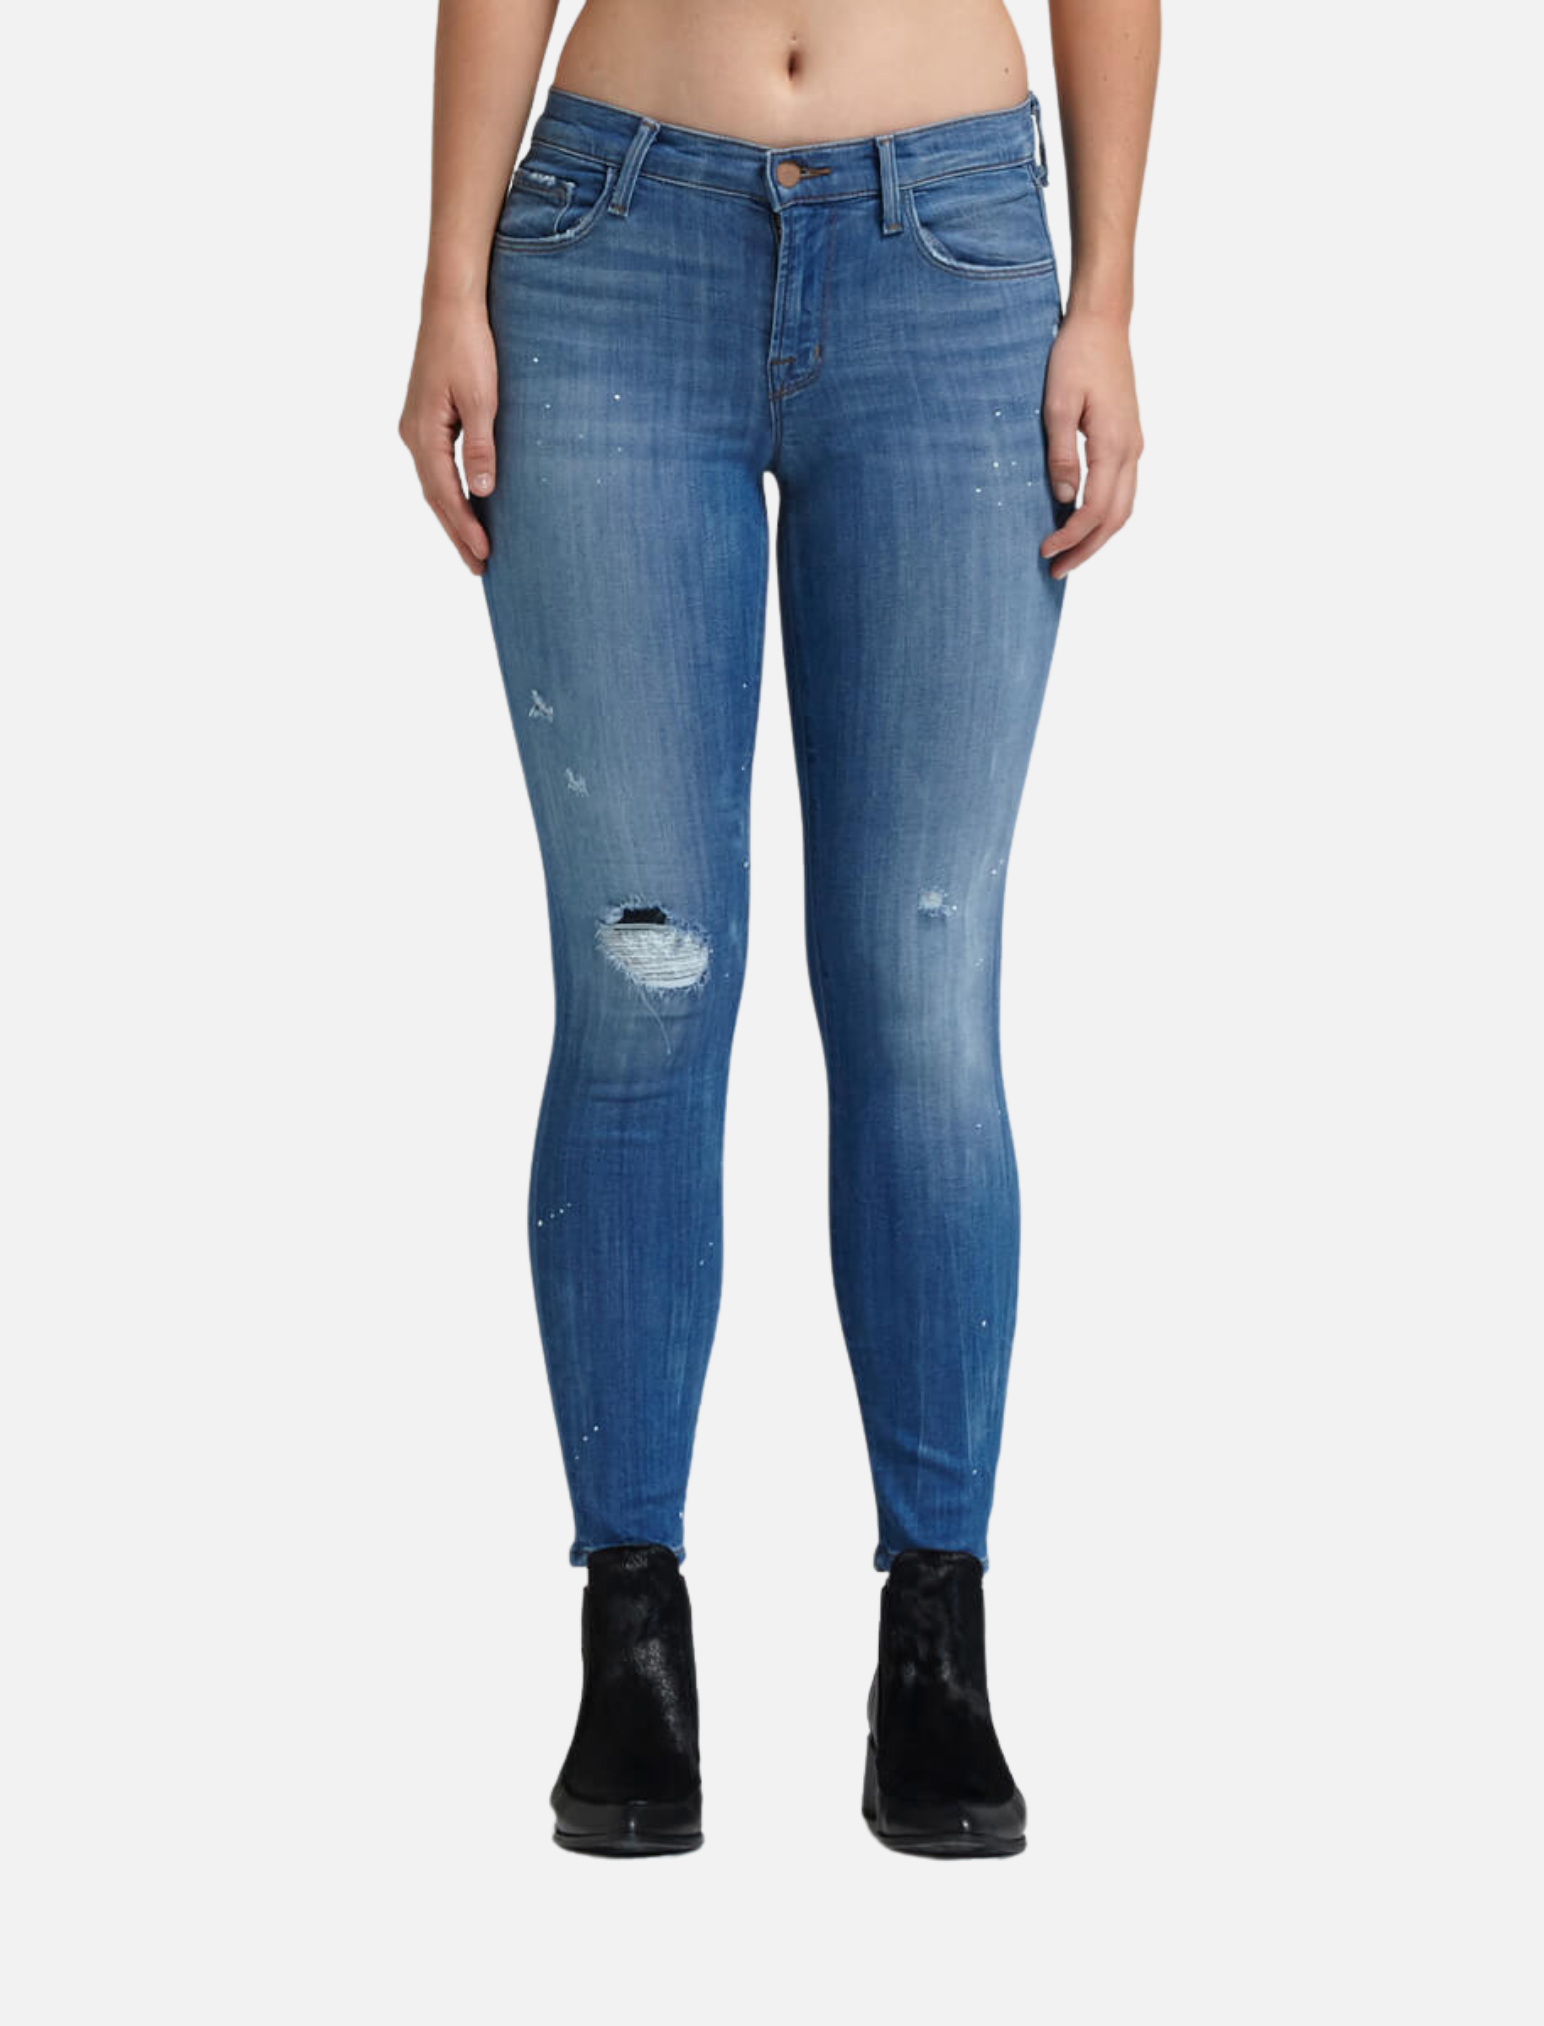 J Brand 835 Mid Rise Capri Jean in Collision – Order Of Style